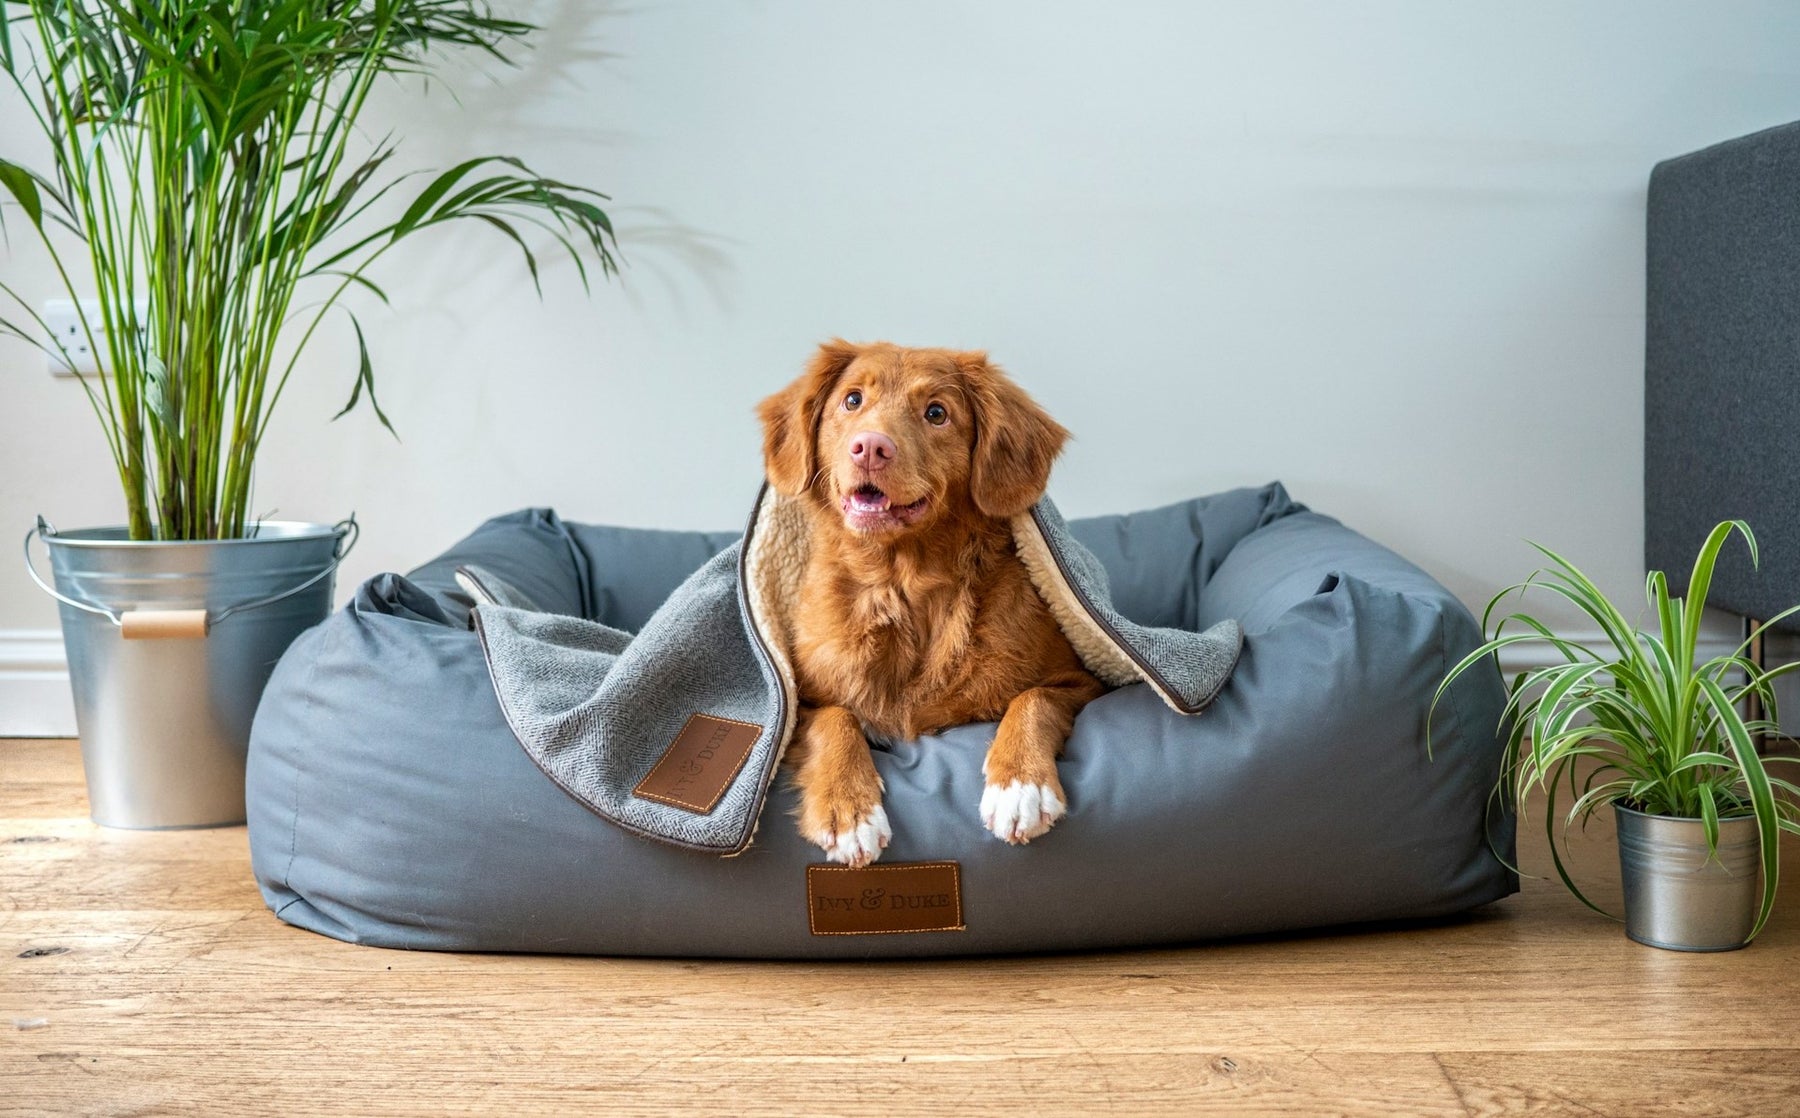 Big Brown Dog In A Doggie Bed